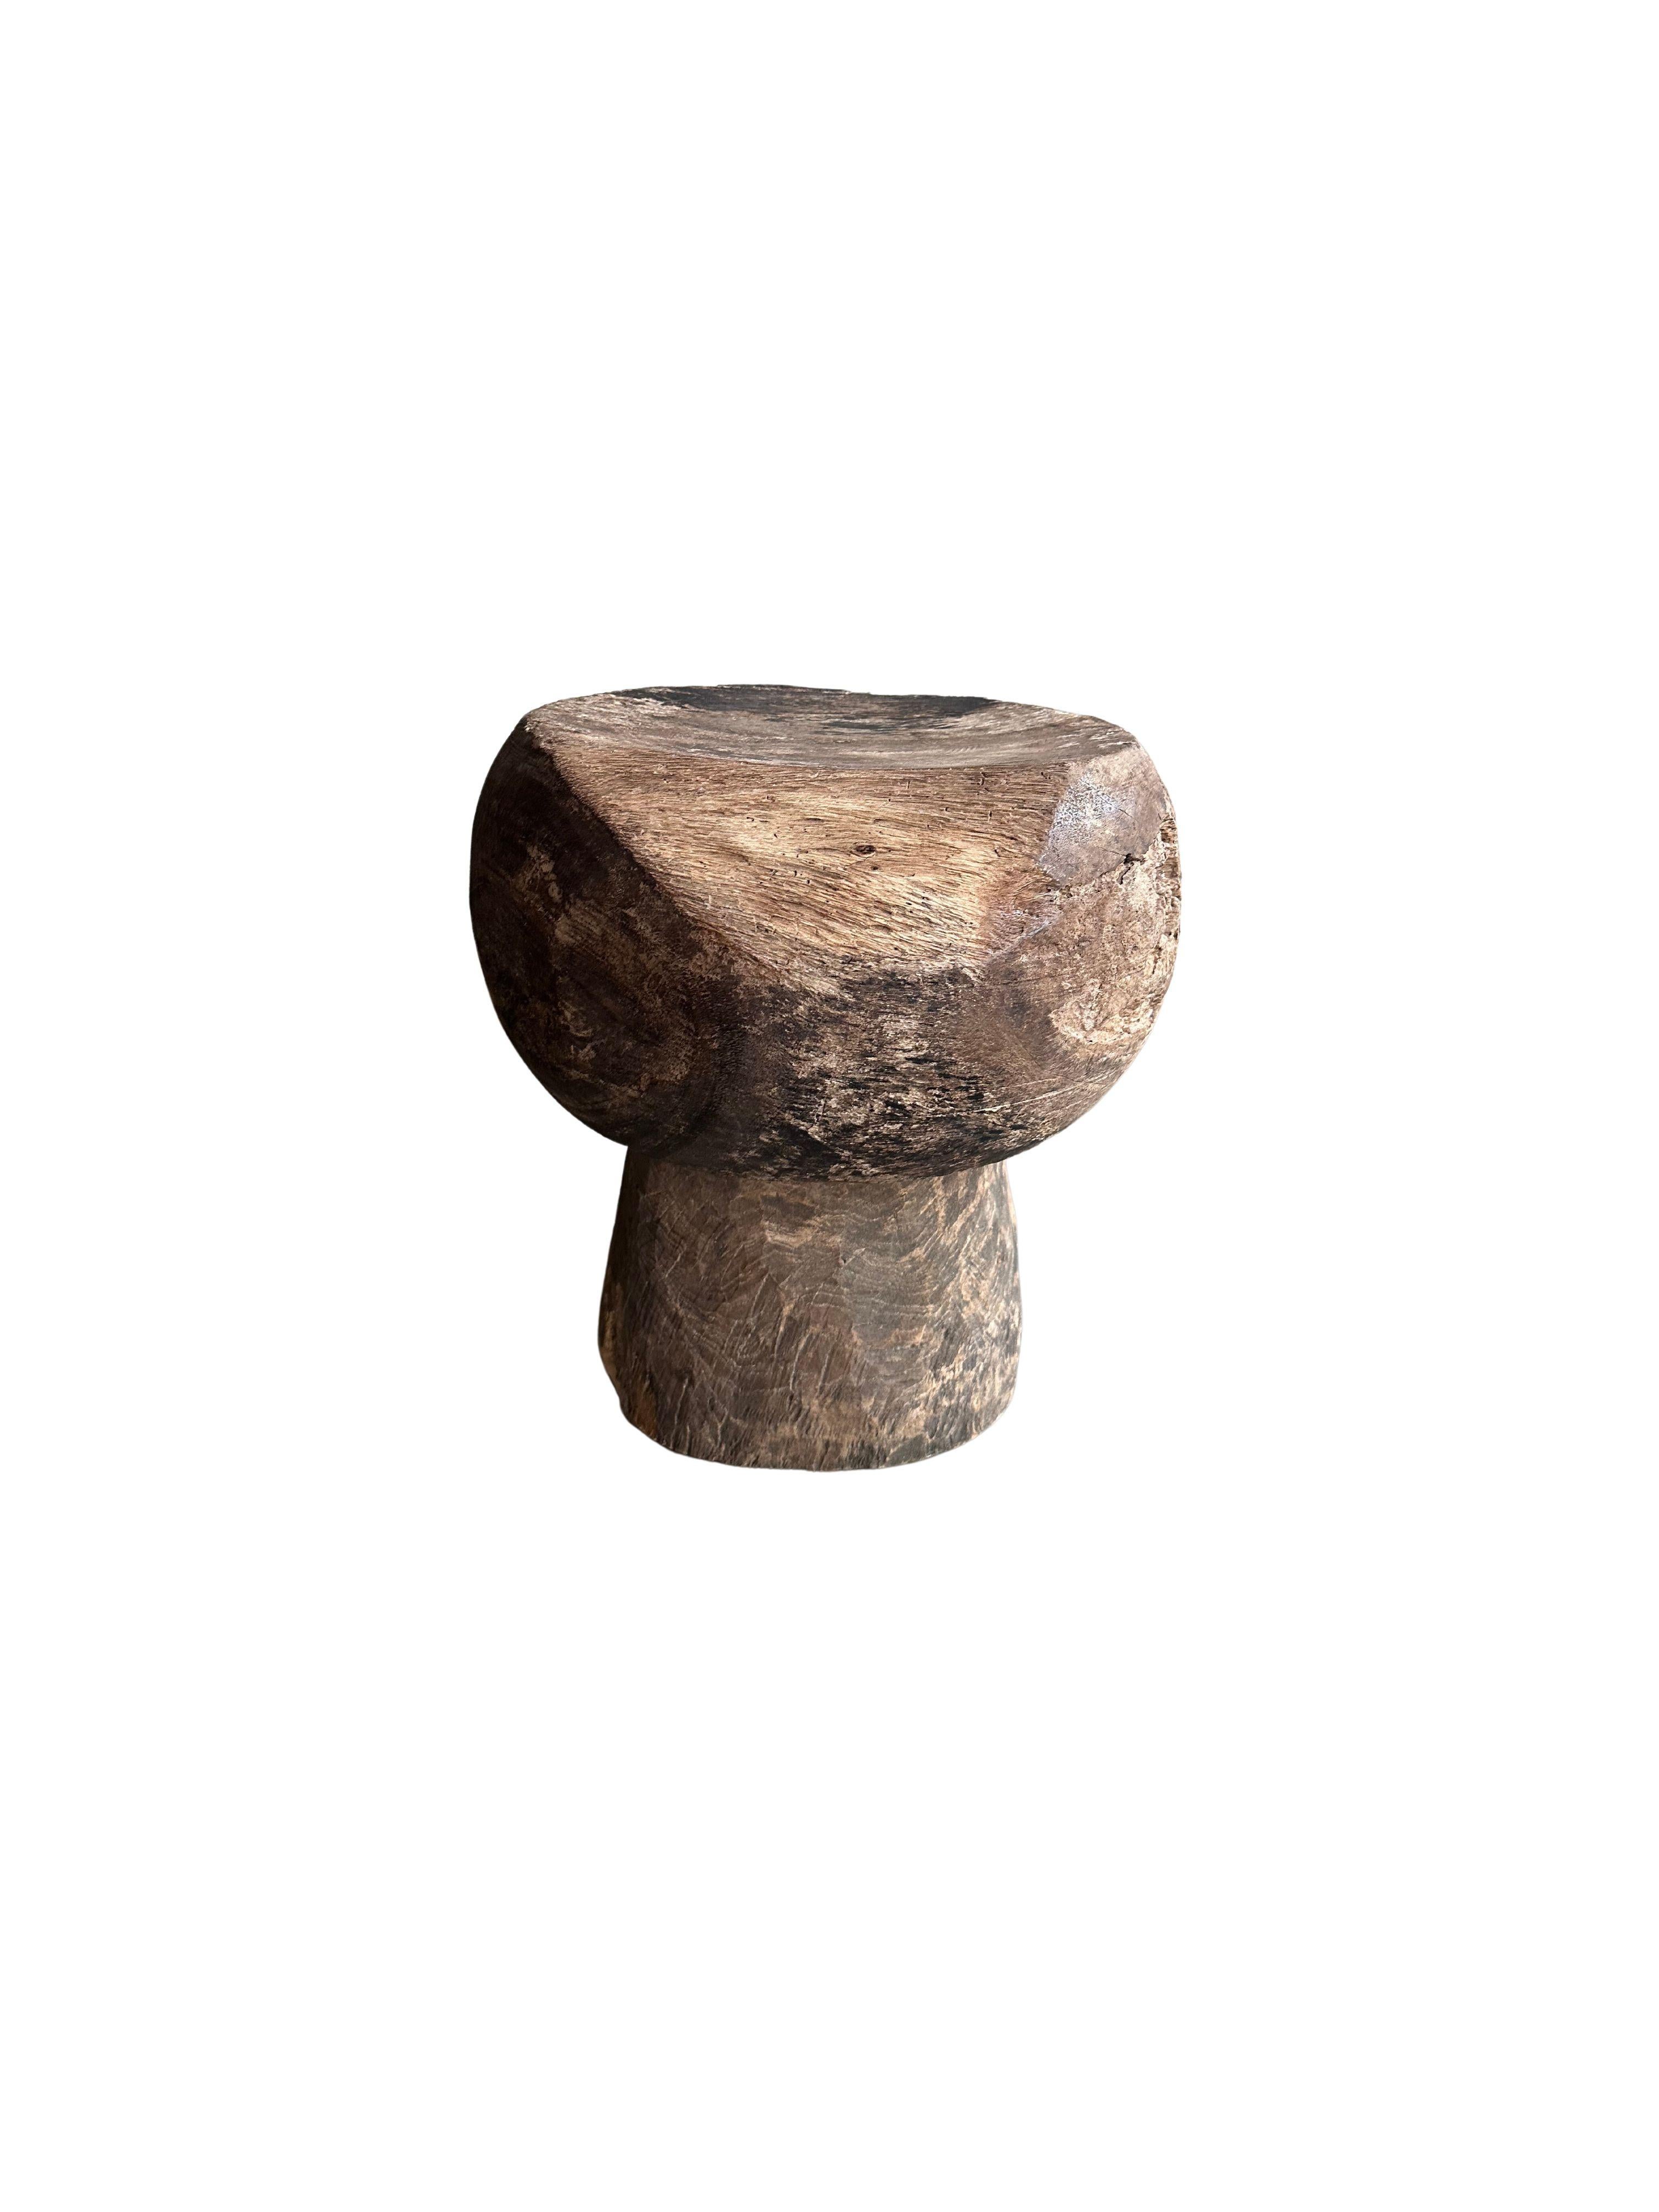 Hand-Crafted Suar Wood Stool From Java, Modern Organic For Sale